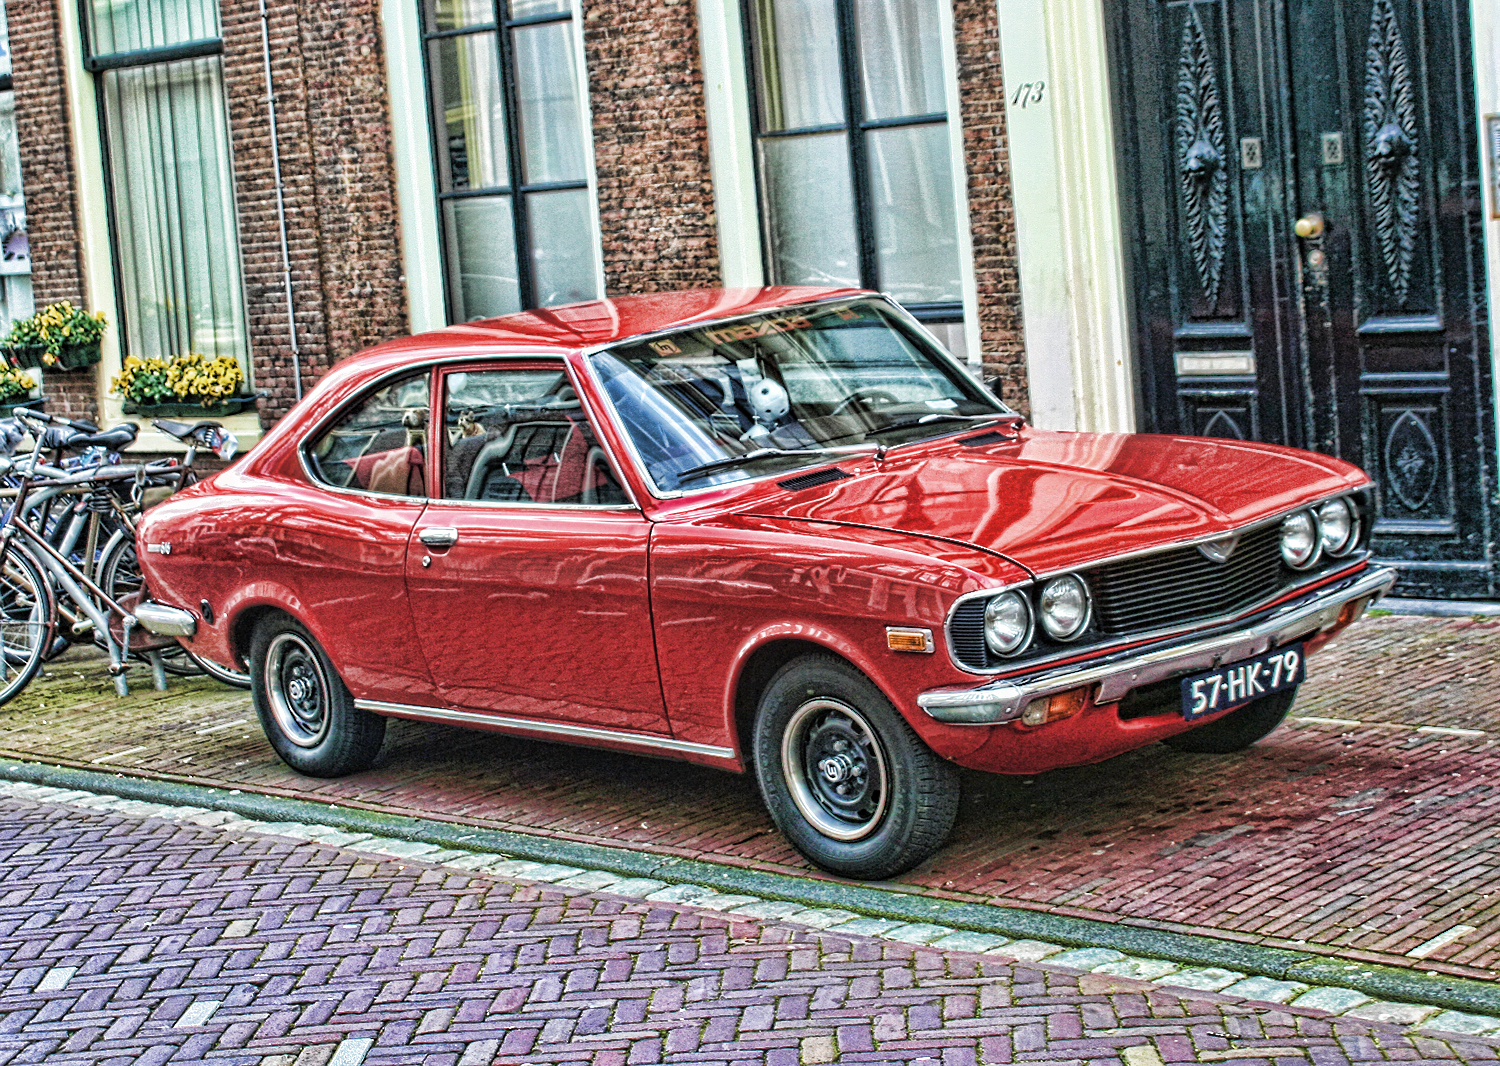 Classic Car - Mazda 616 Coupe | Flickr - Photo Sharing!